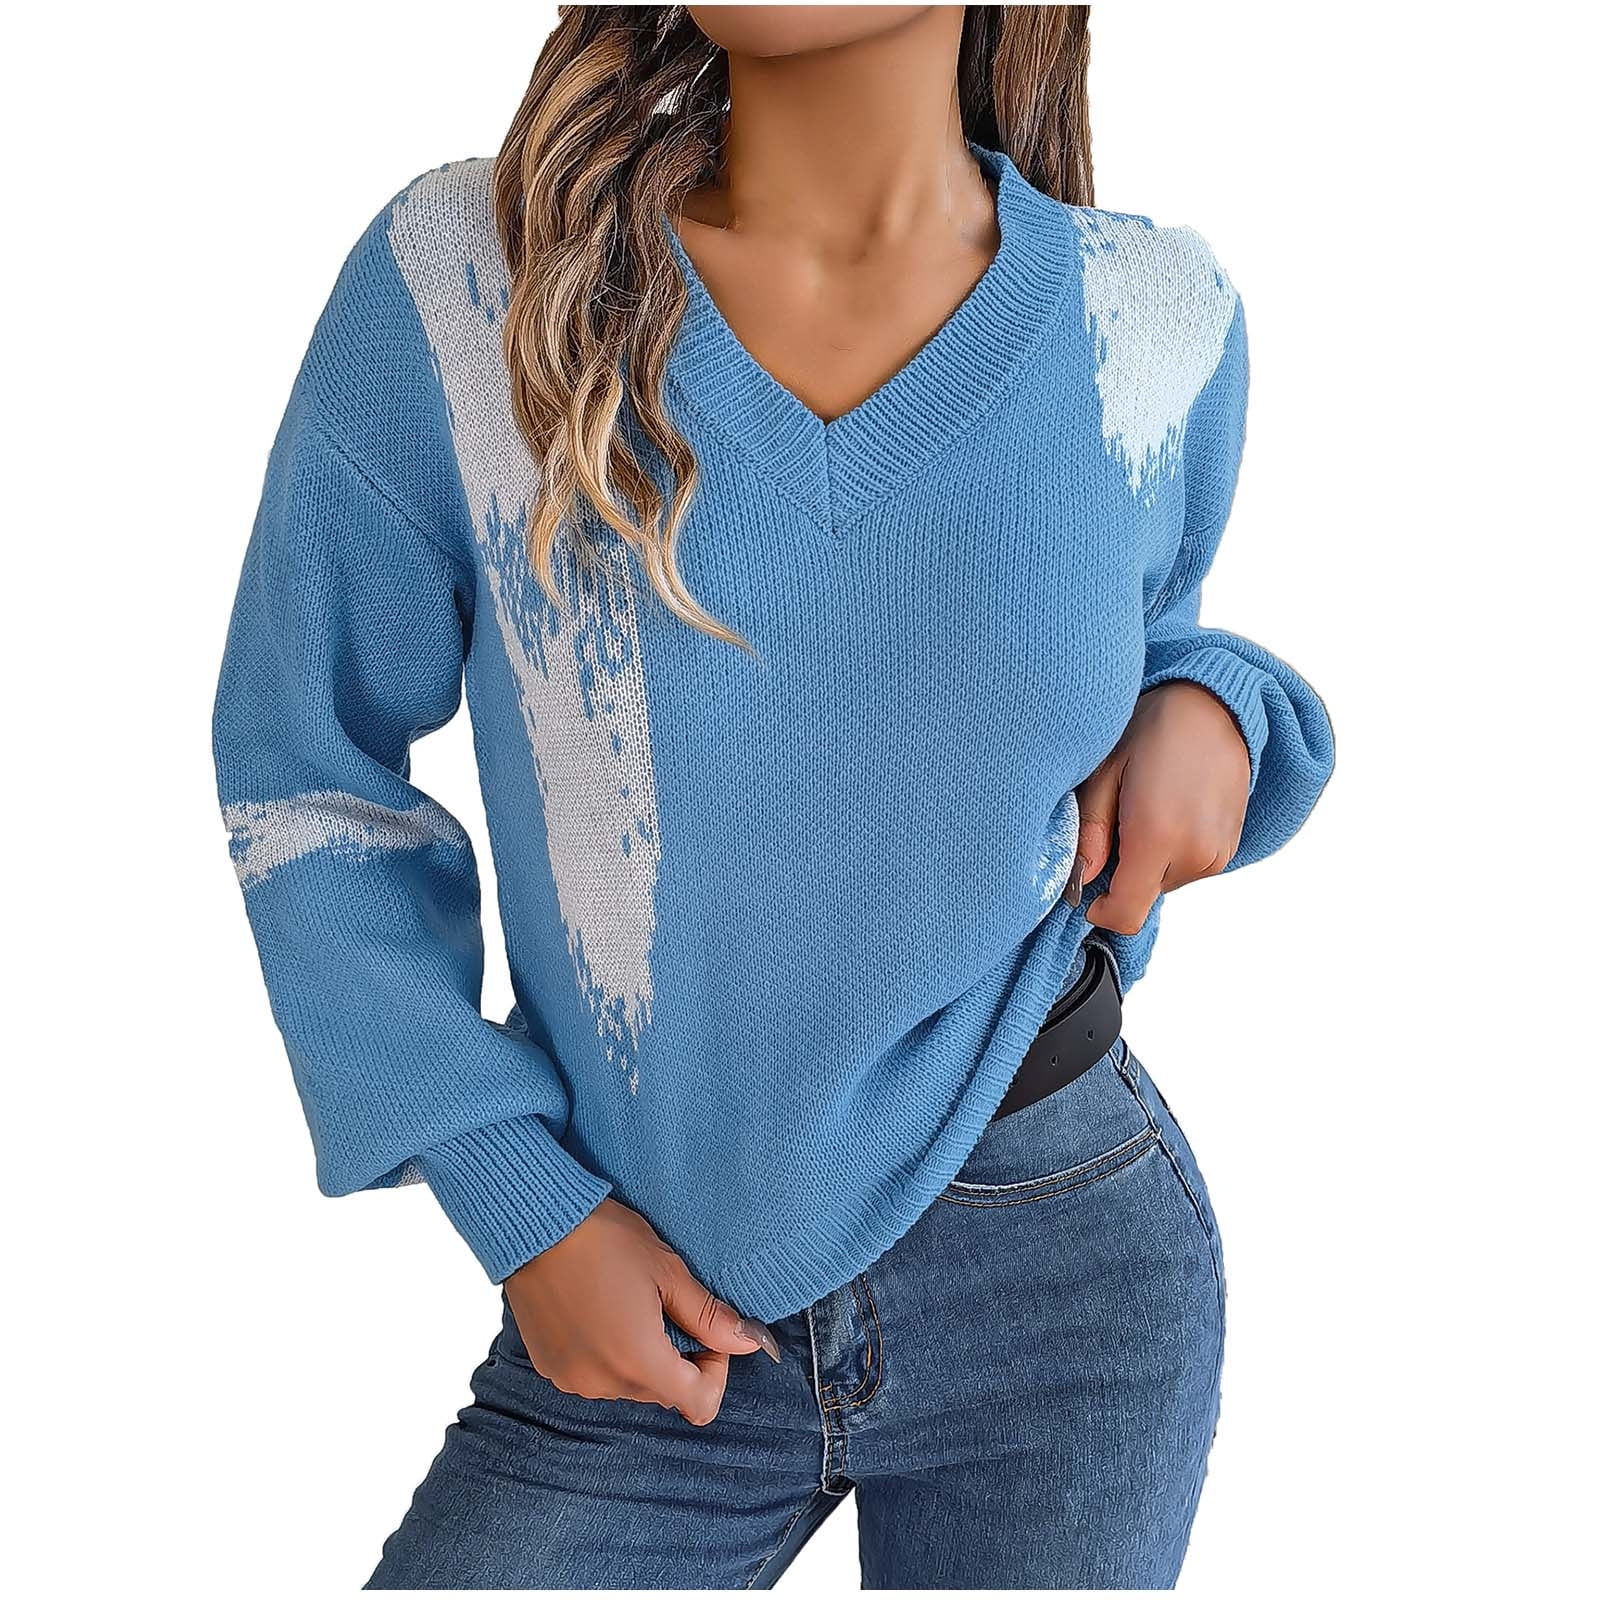 ZZwxWA Lightweight Sweaters for Women, Clearance, Women's Casual V-neck ...